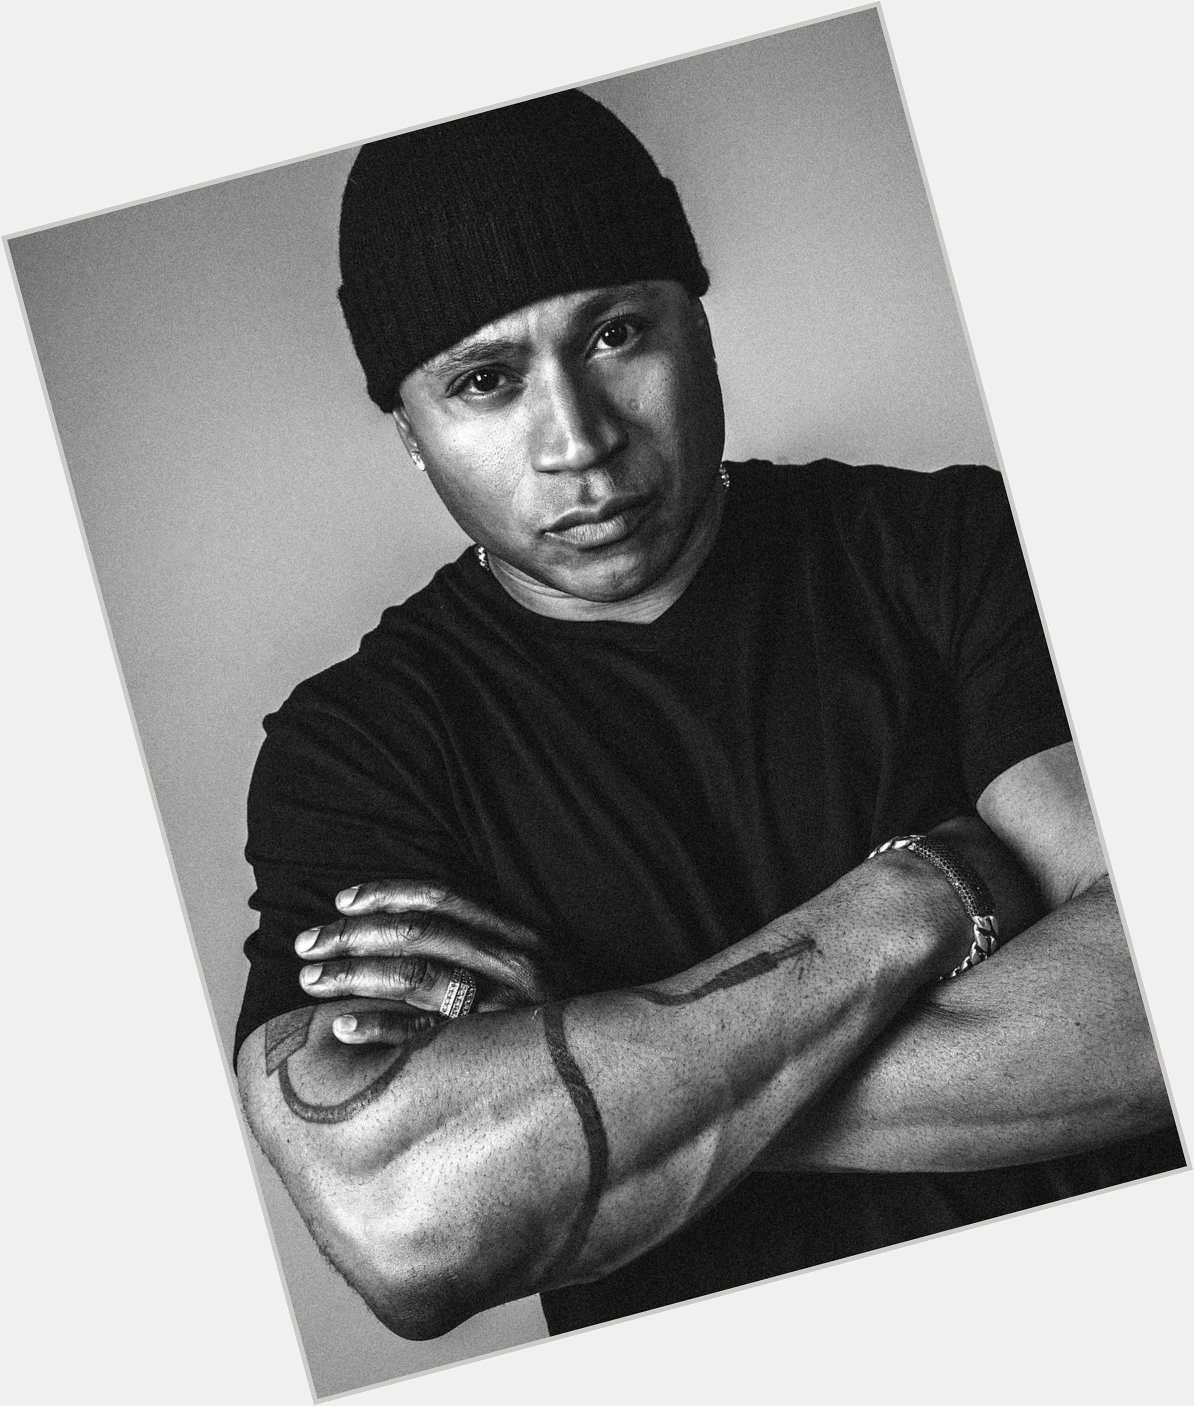 Happy Birthday LL Cool J!
The Walker Collective - A Law Firm For Creatives
 